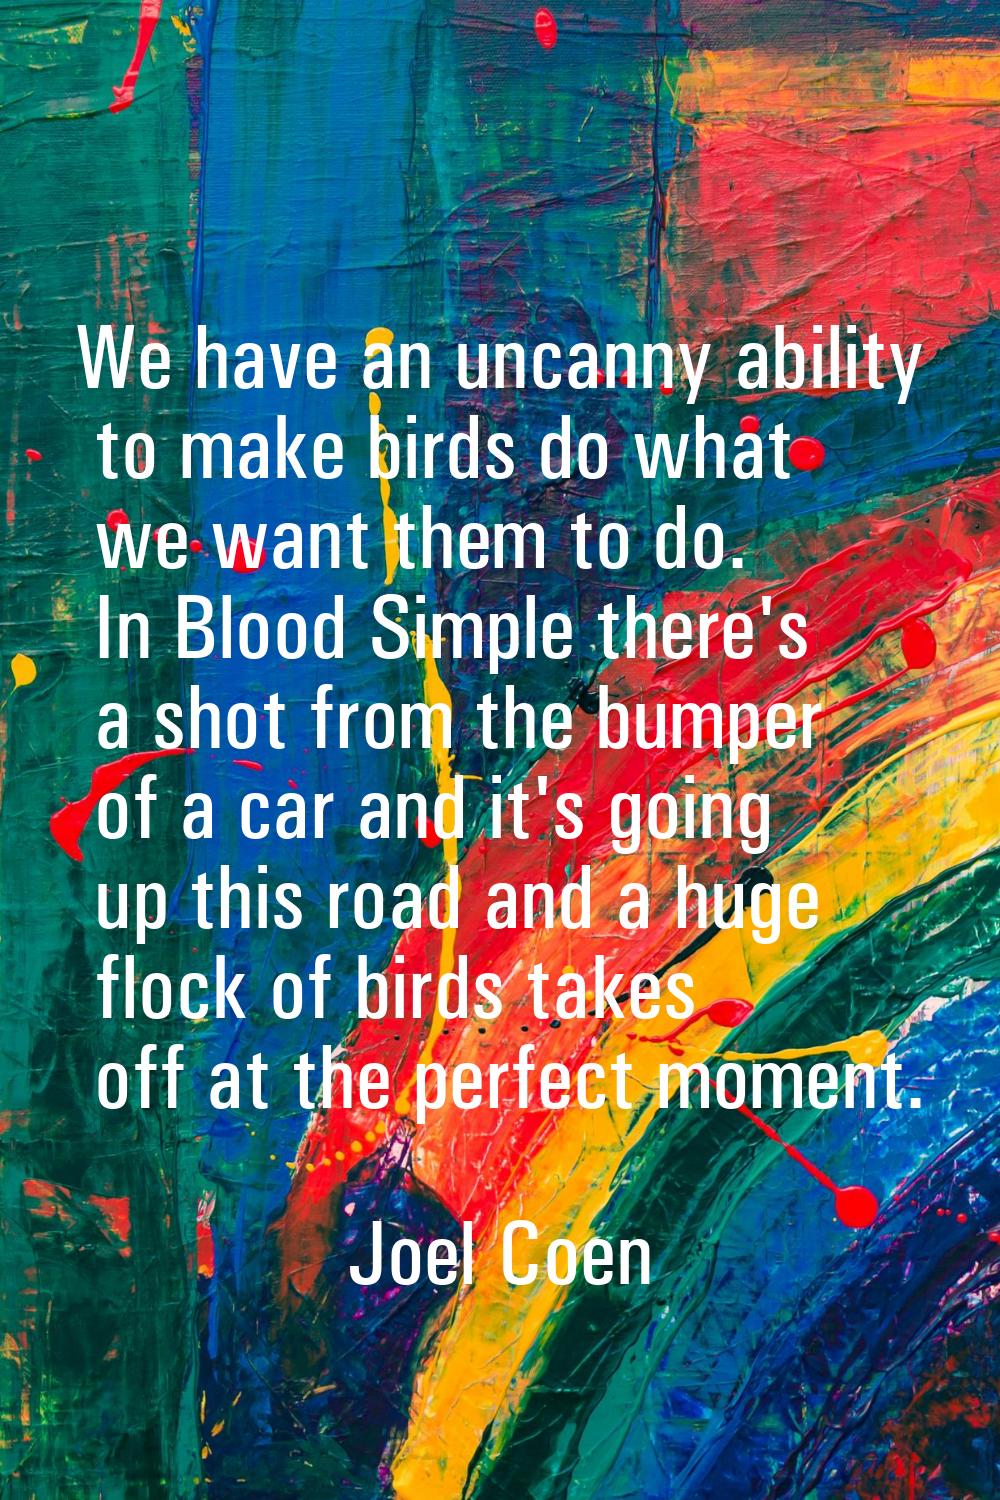 We have an uncanny ability to make birds do what we want them to do. In Blood Simple there's a shot